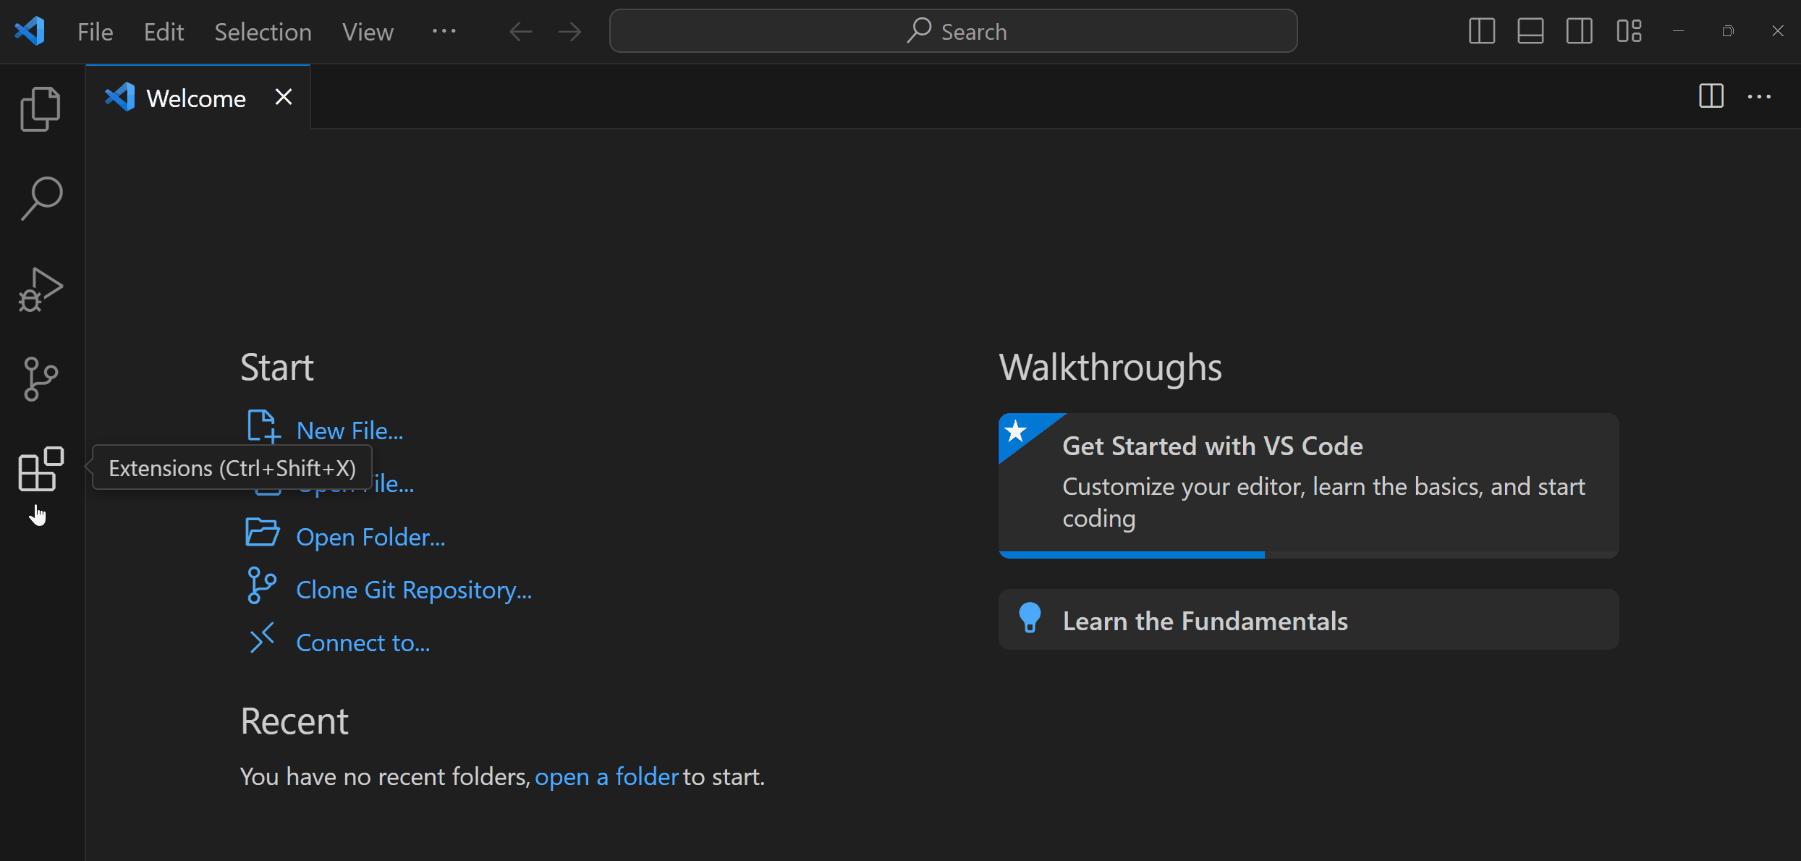 Gif installing the Python extension in a fresh install of VS Code